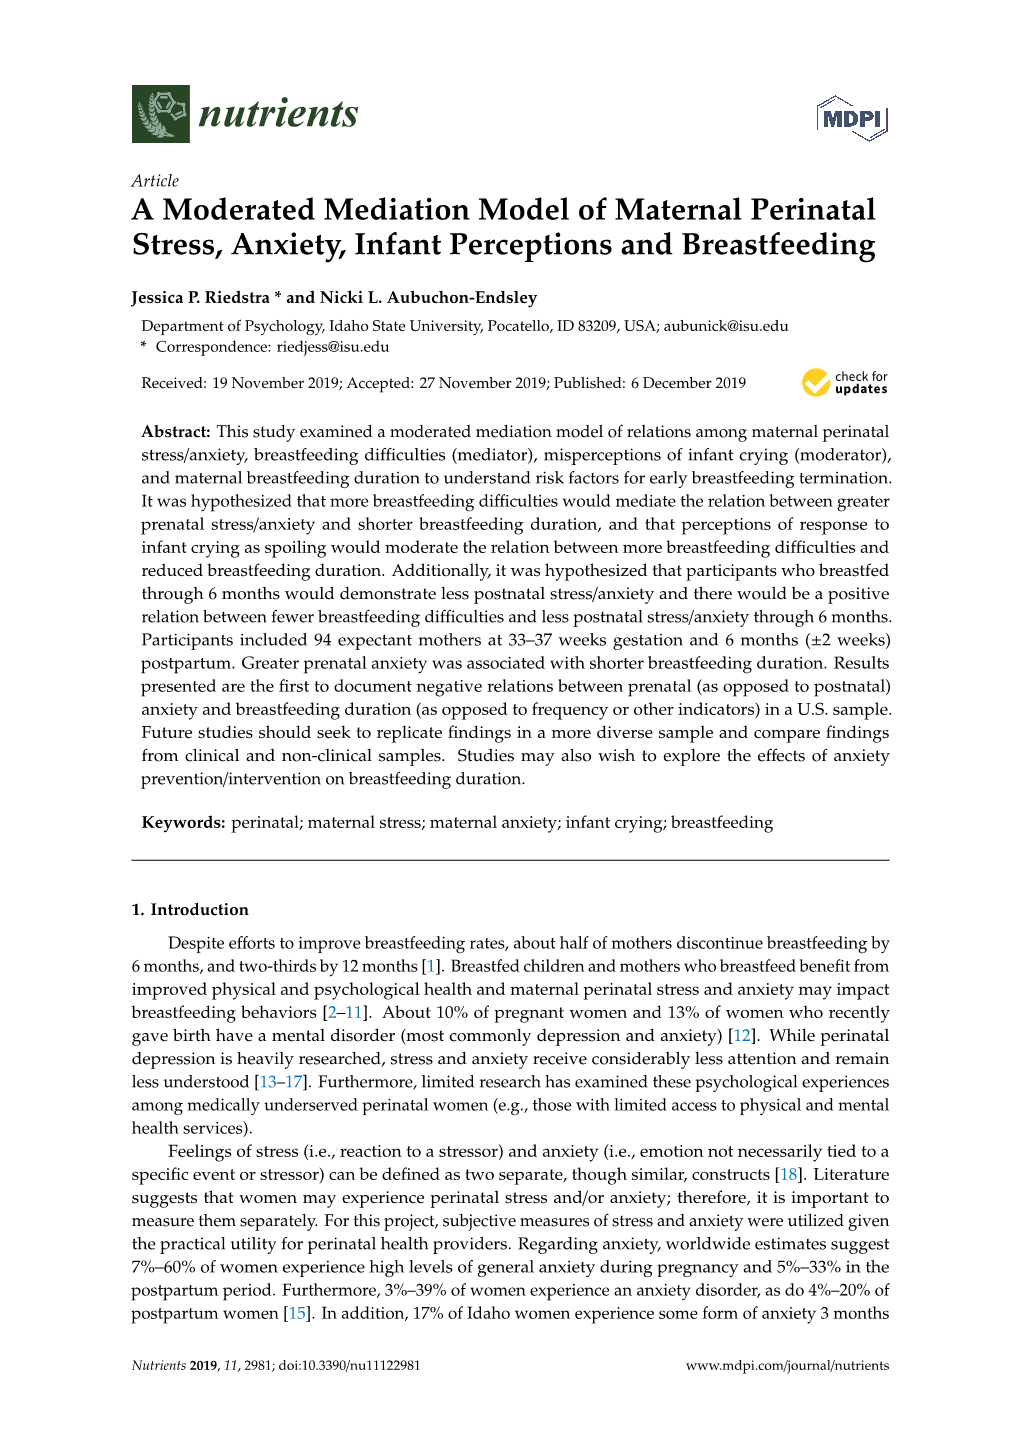 A Moderated Mediation Model of Maternal Perinatal Stress, Anxiety, Infant Perceptions and Breastfeeding